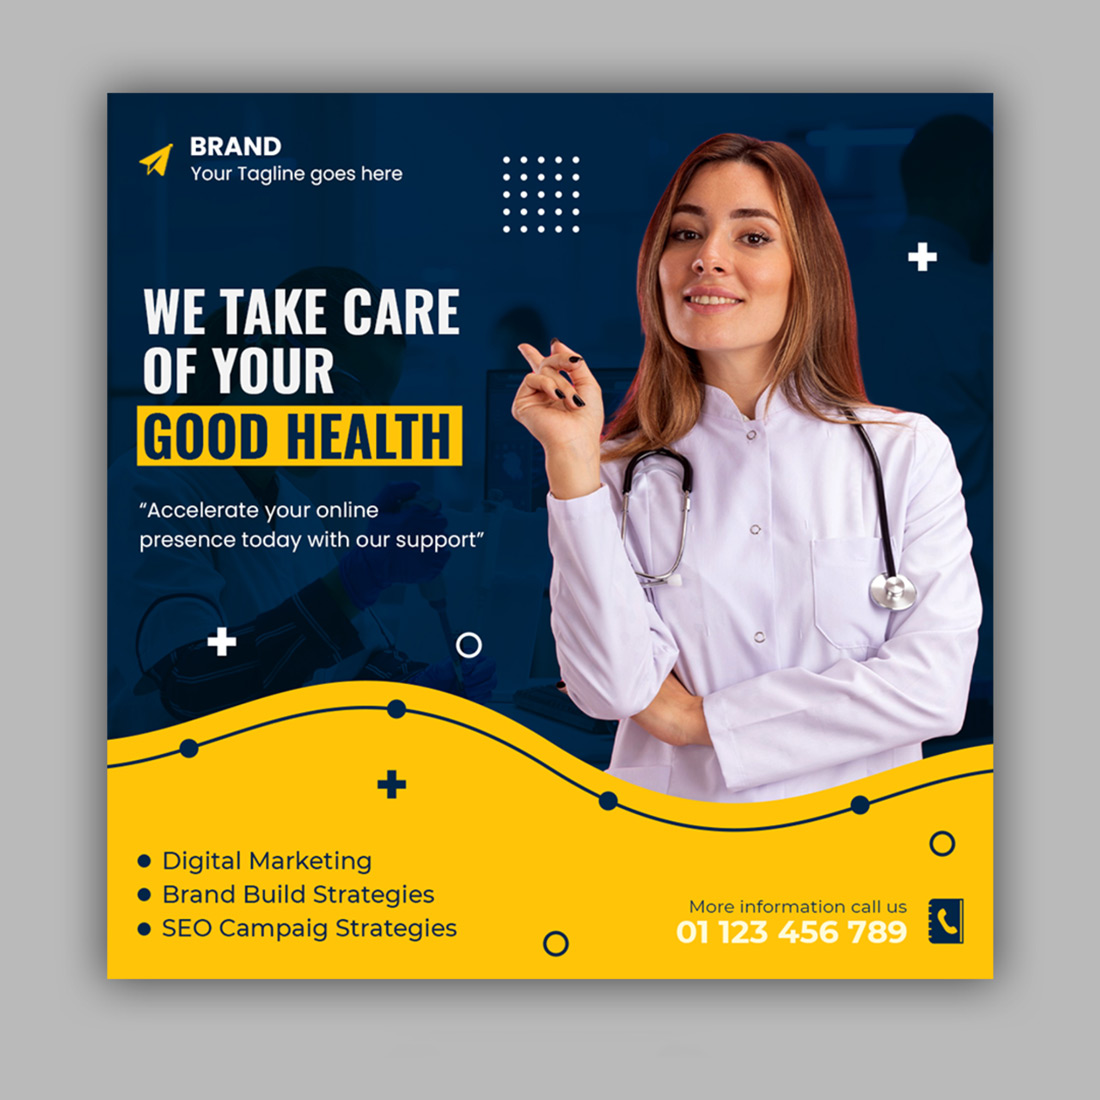 Beautiful Medical Health Care Flyer Social Media And Web Banner Post Template- Only $4 cover image.